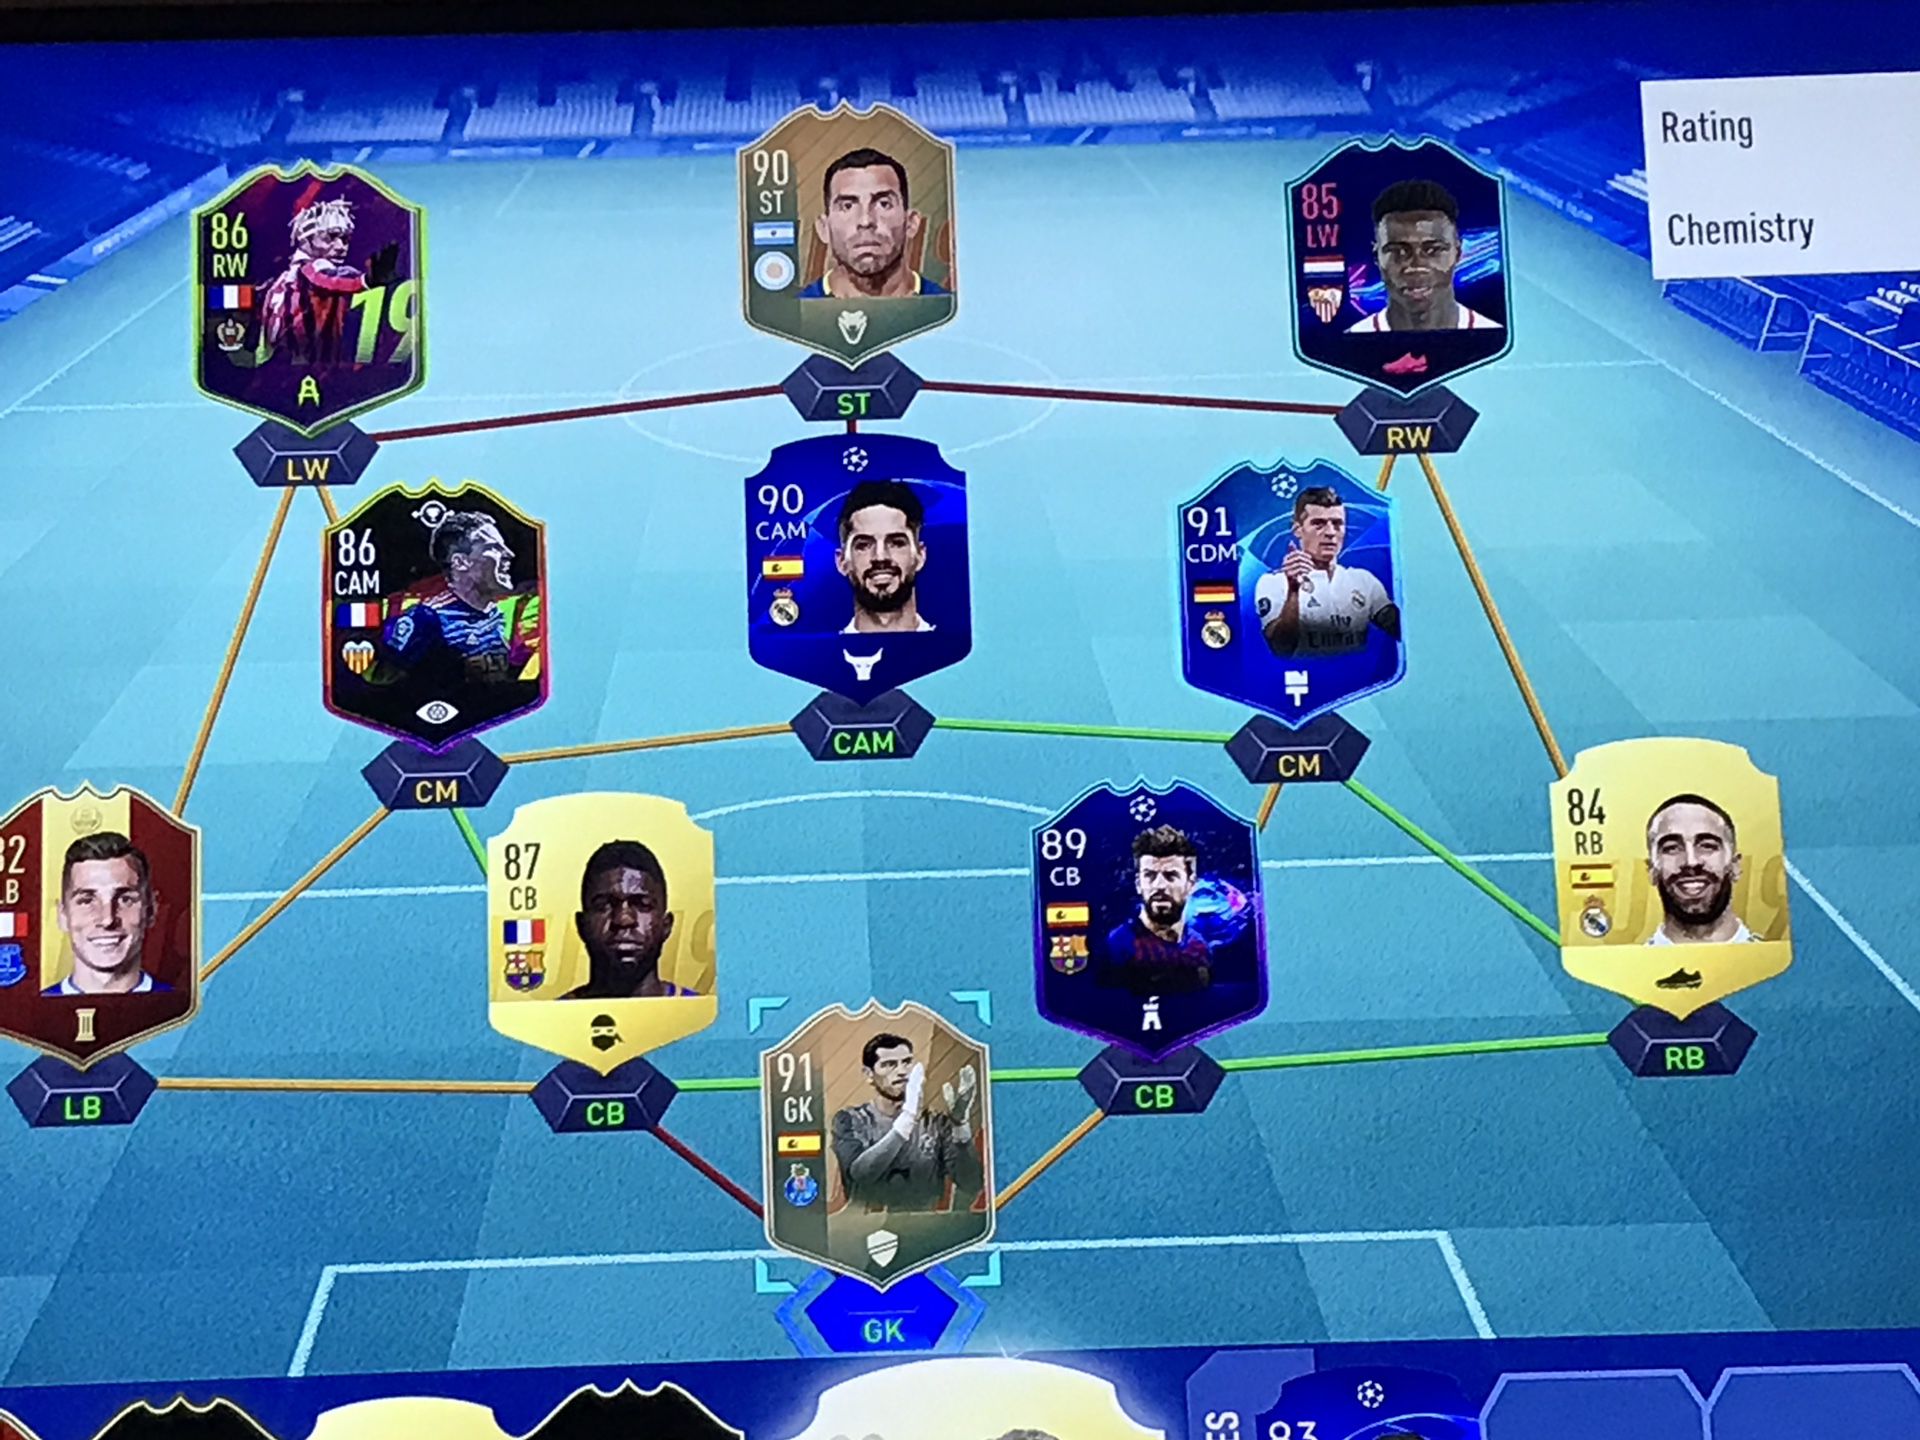 PS4 account fifa 19 and cod